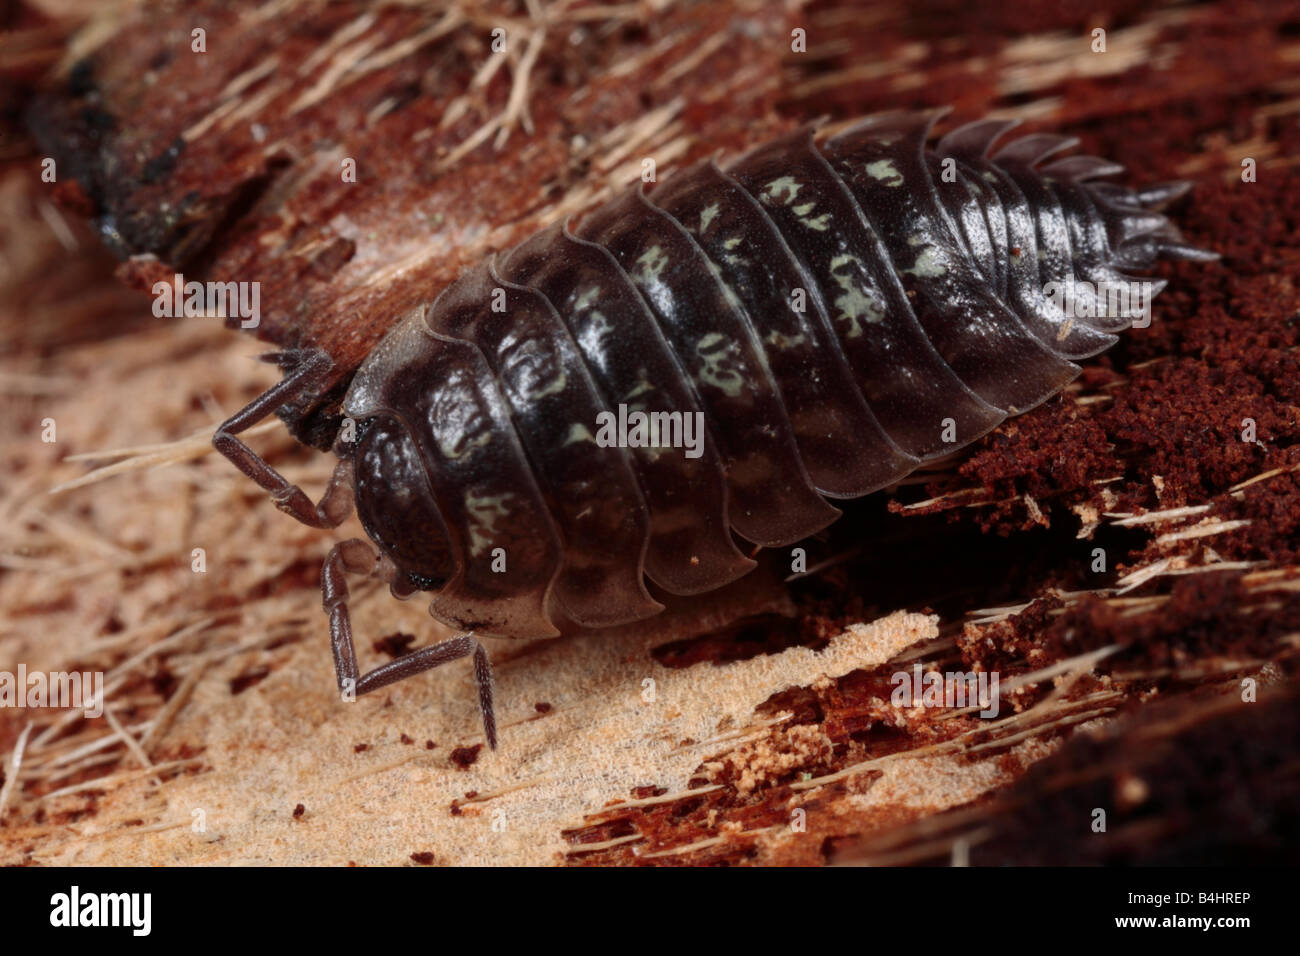 Woodlouse (Oniscus asellus). Powys, Galles. Foto Stock